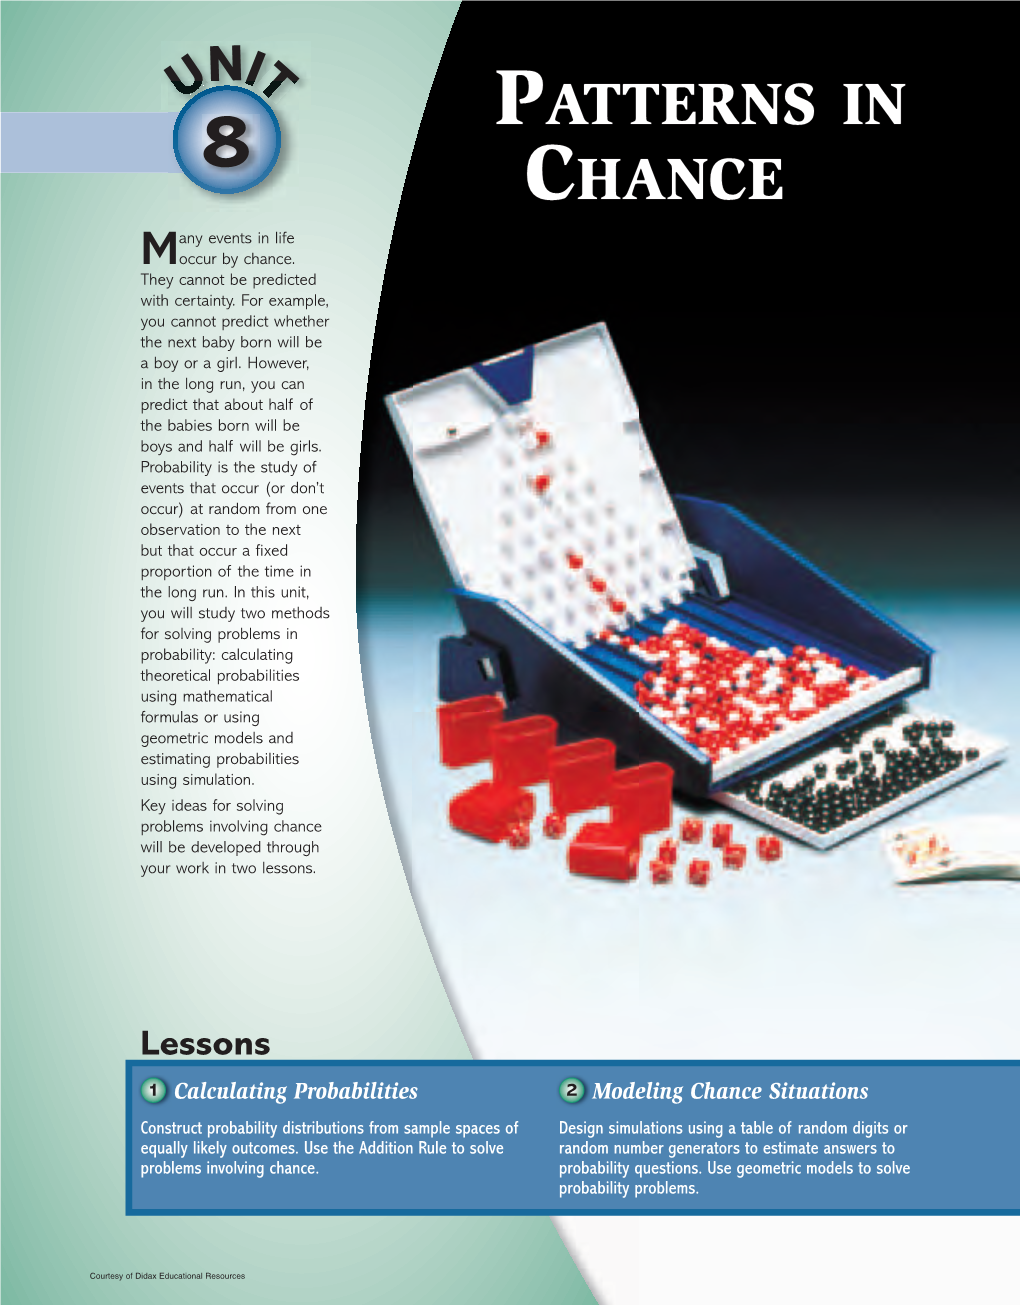 Unit 8: Patterns in Chance